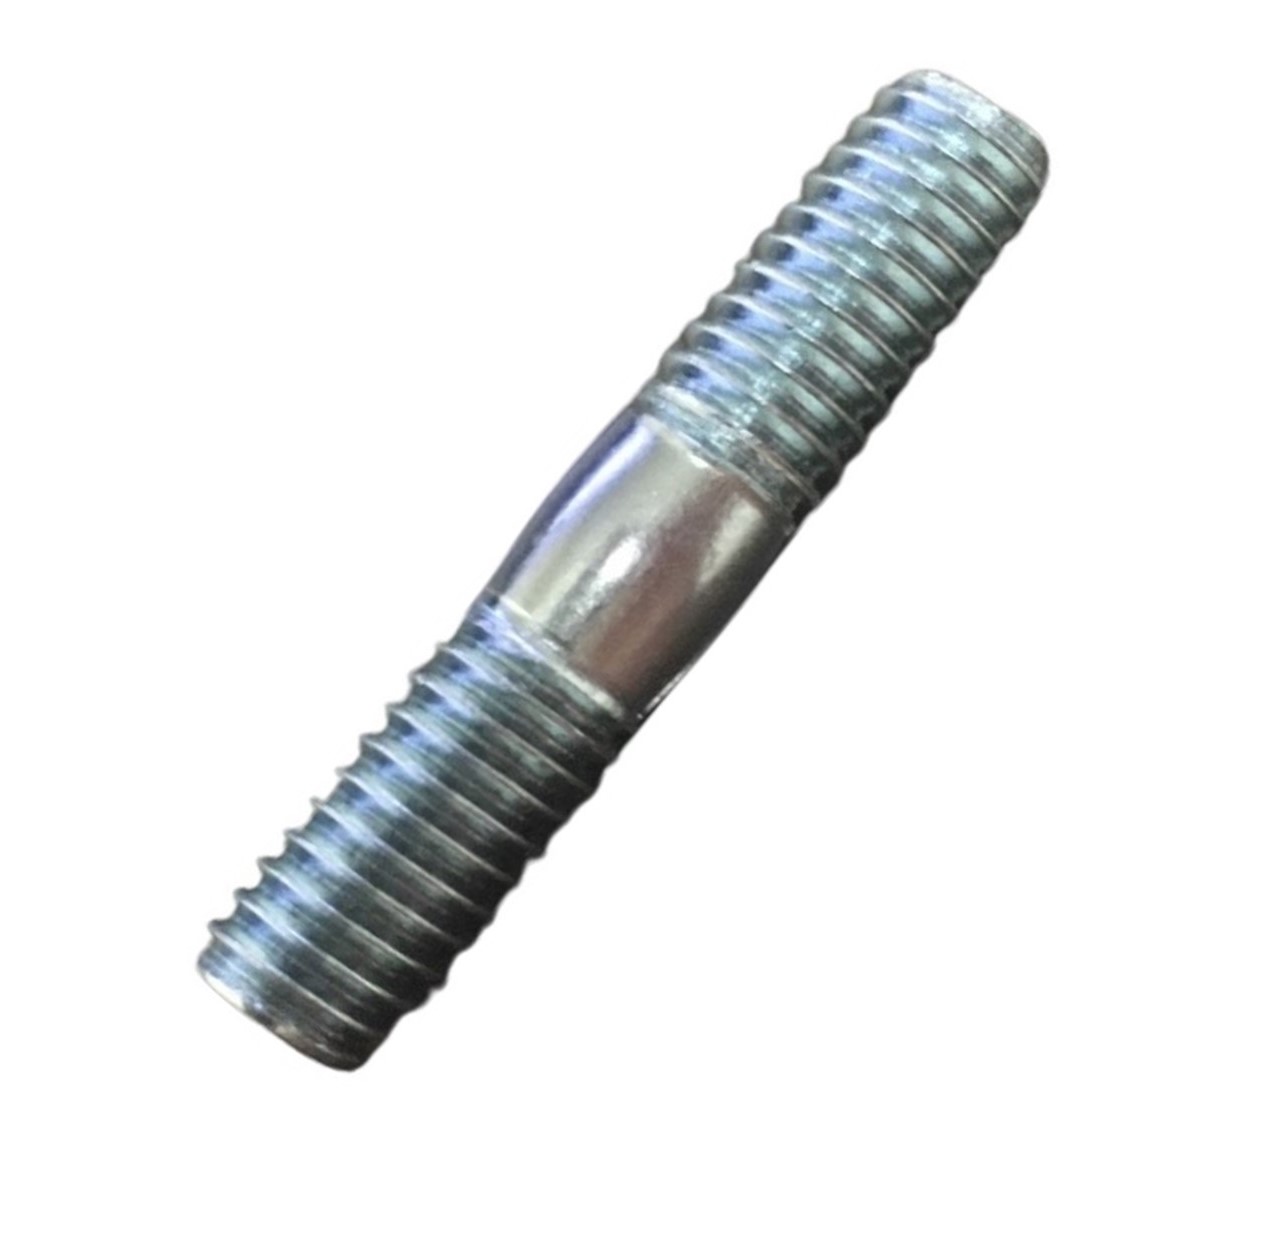 EXHAUST STUD SOLD PER PC 6mm X 30mm Fit Most 40-300cc Motors, GY6-50-125-150, used on Scooters, ATVs, Dirt Bikes, & Go Karts